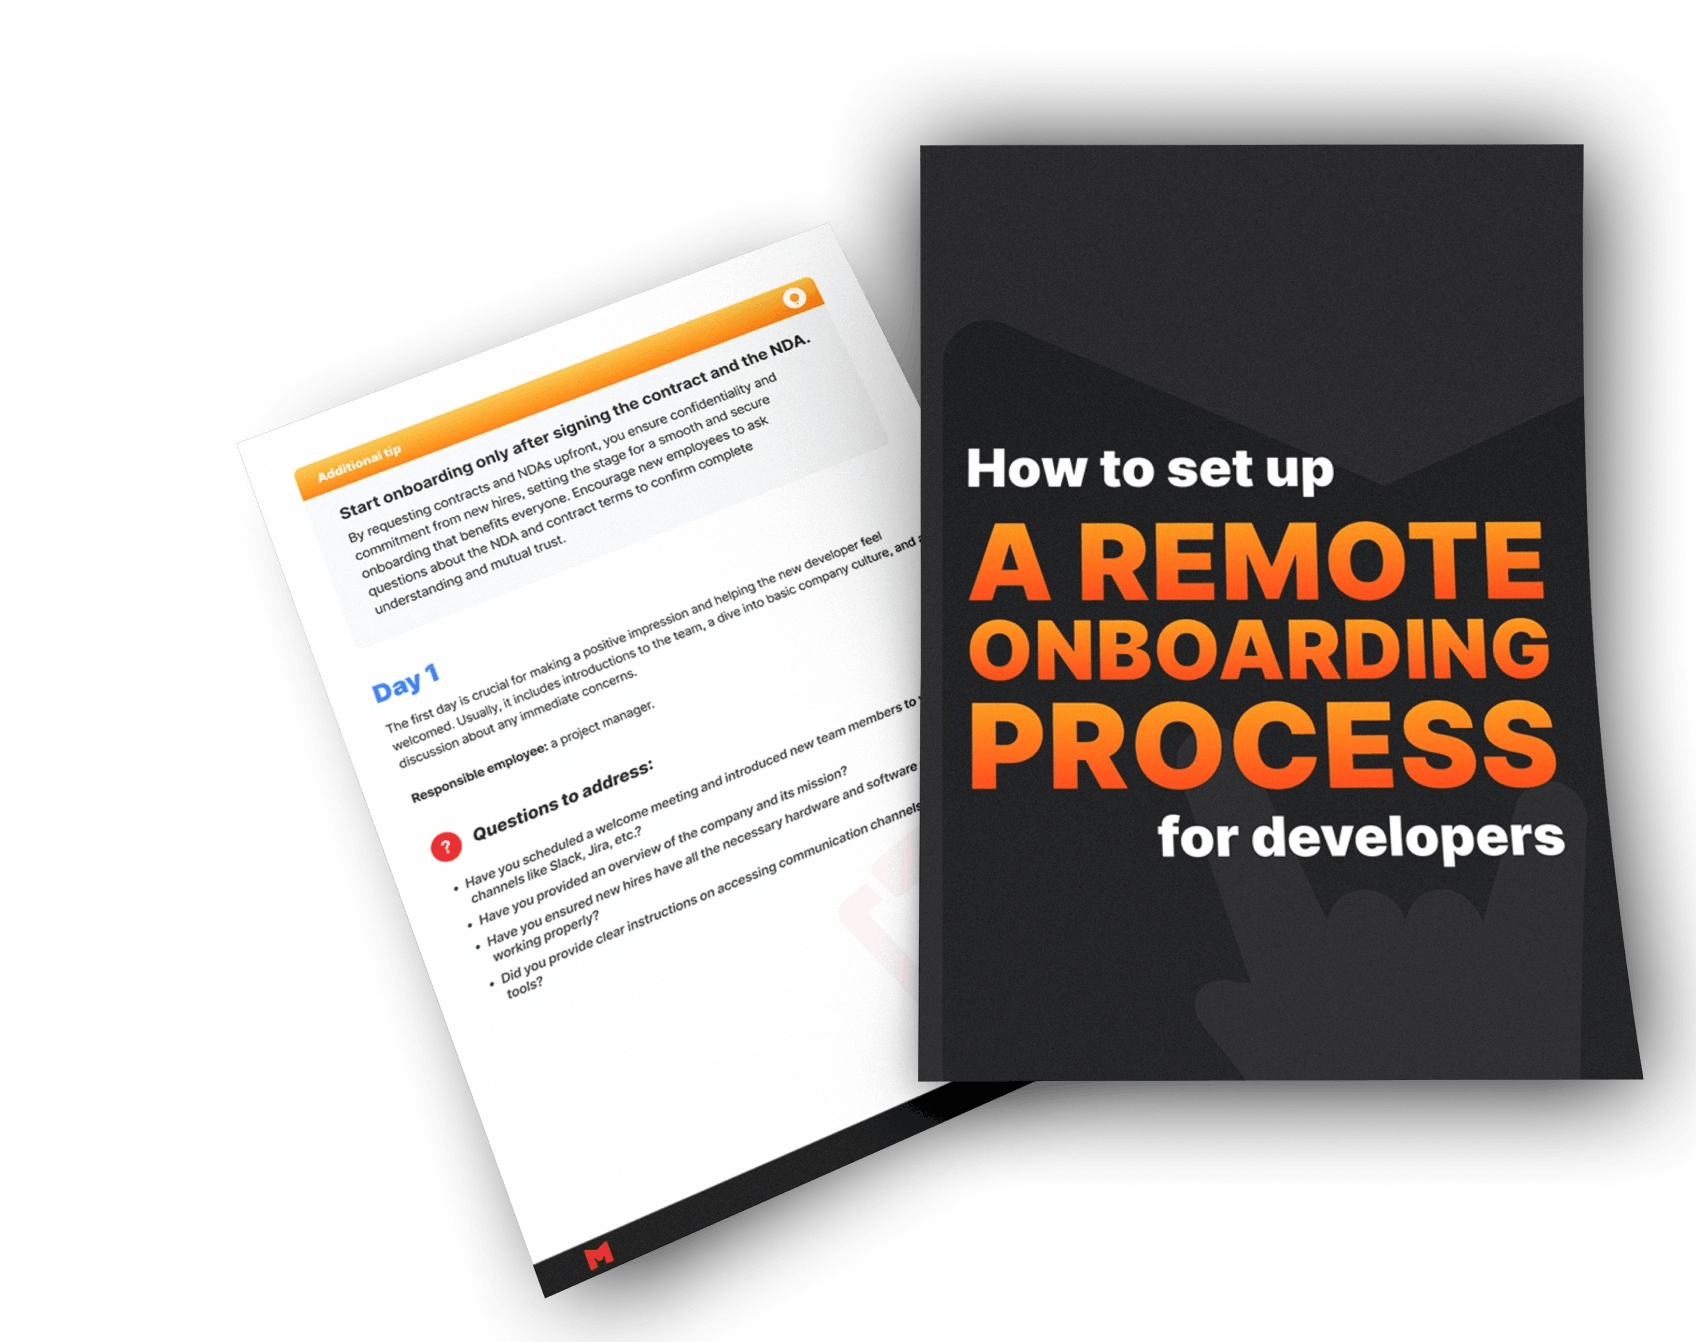 How to set up a remote onboarding process for developers